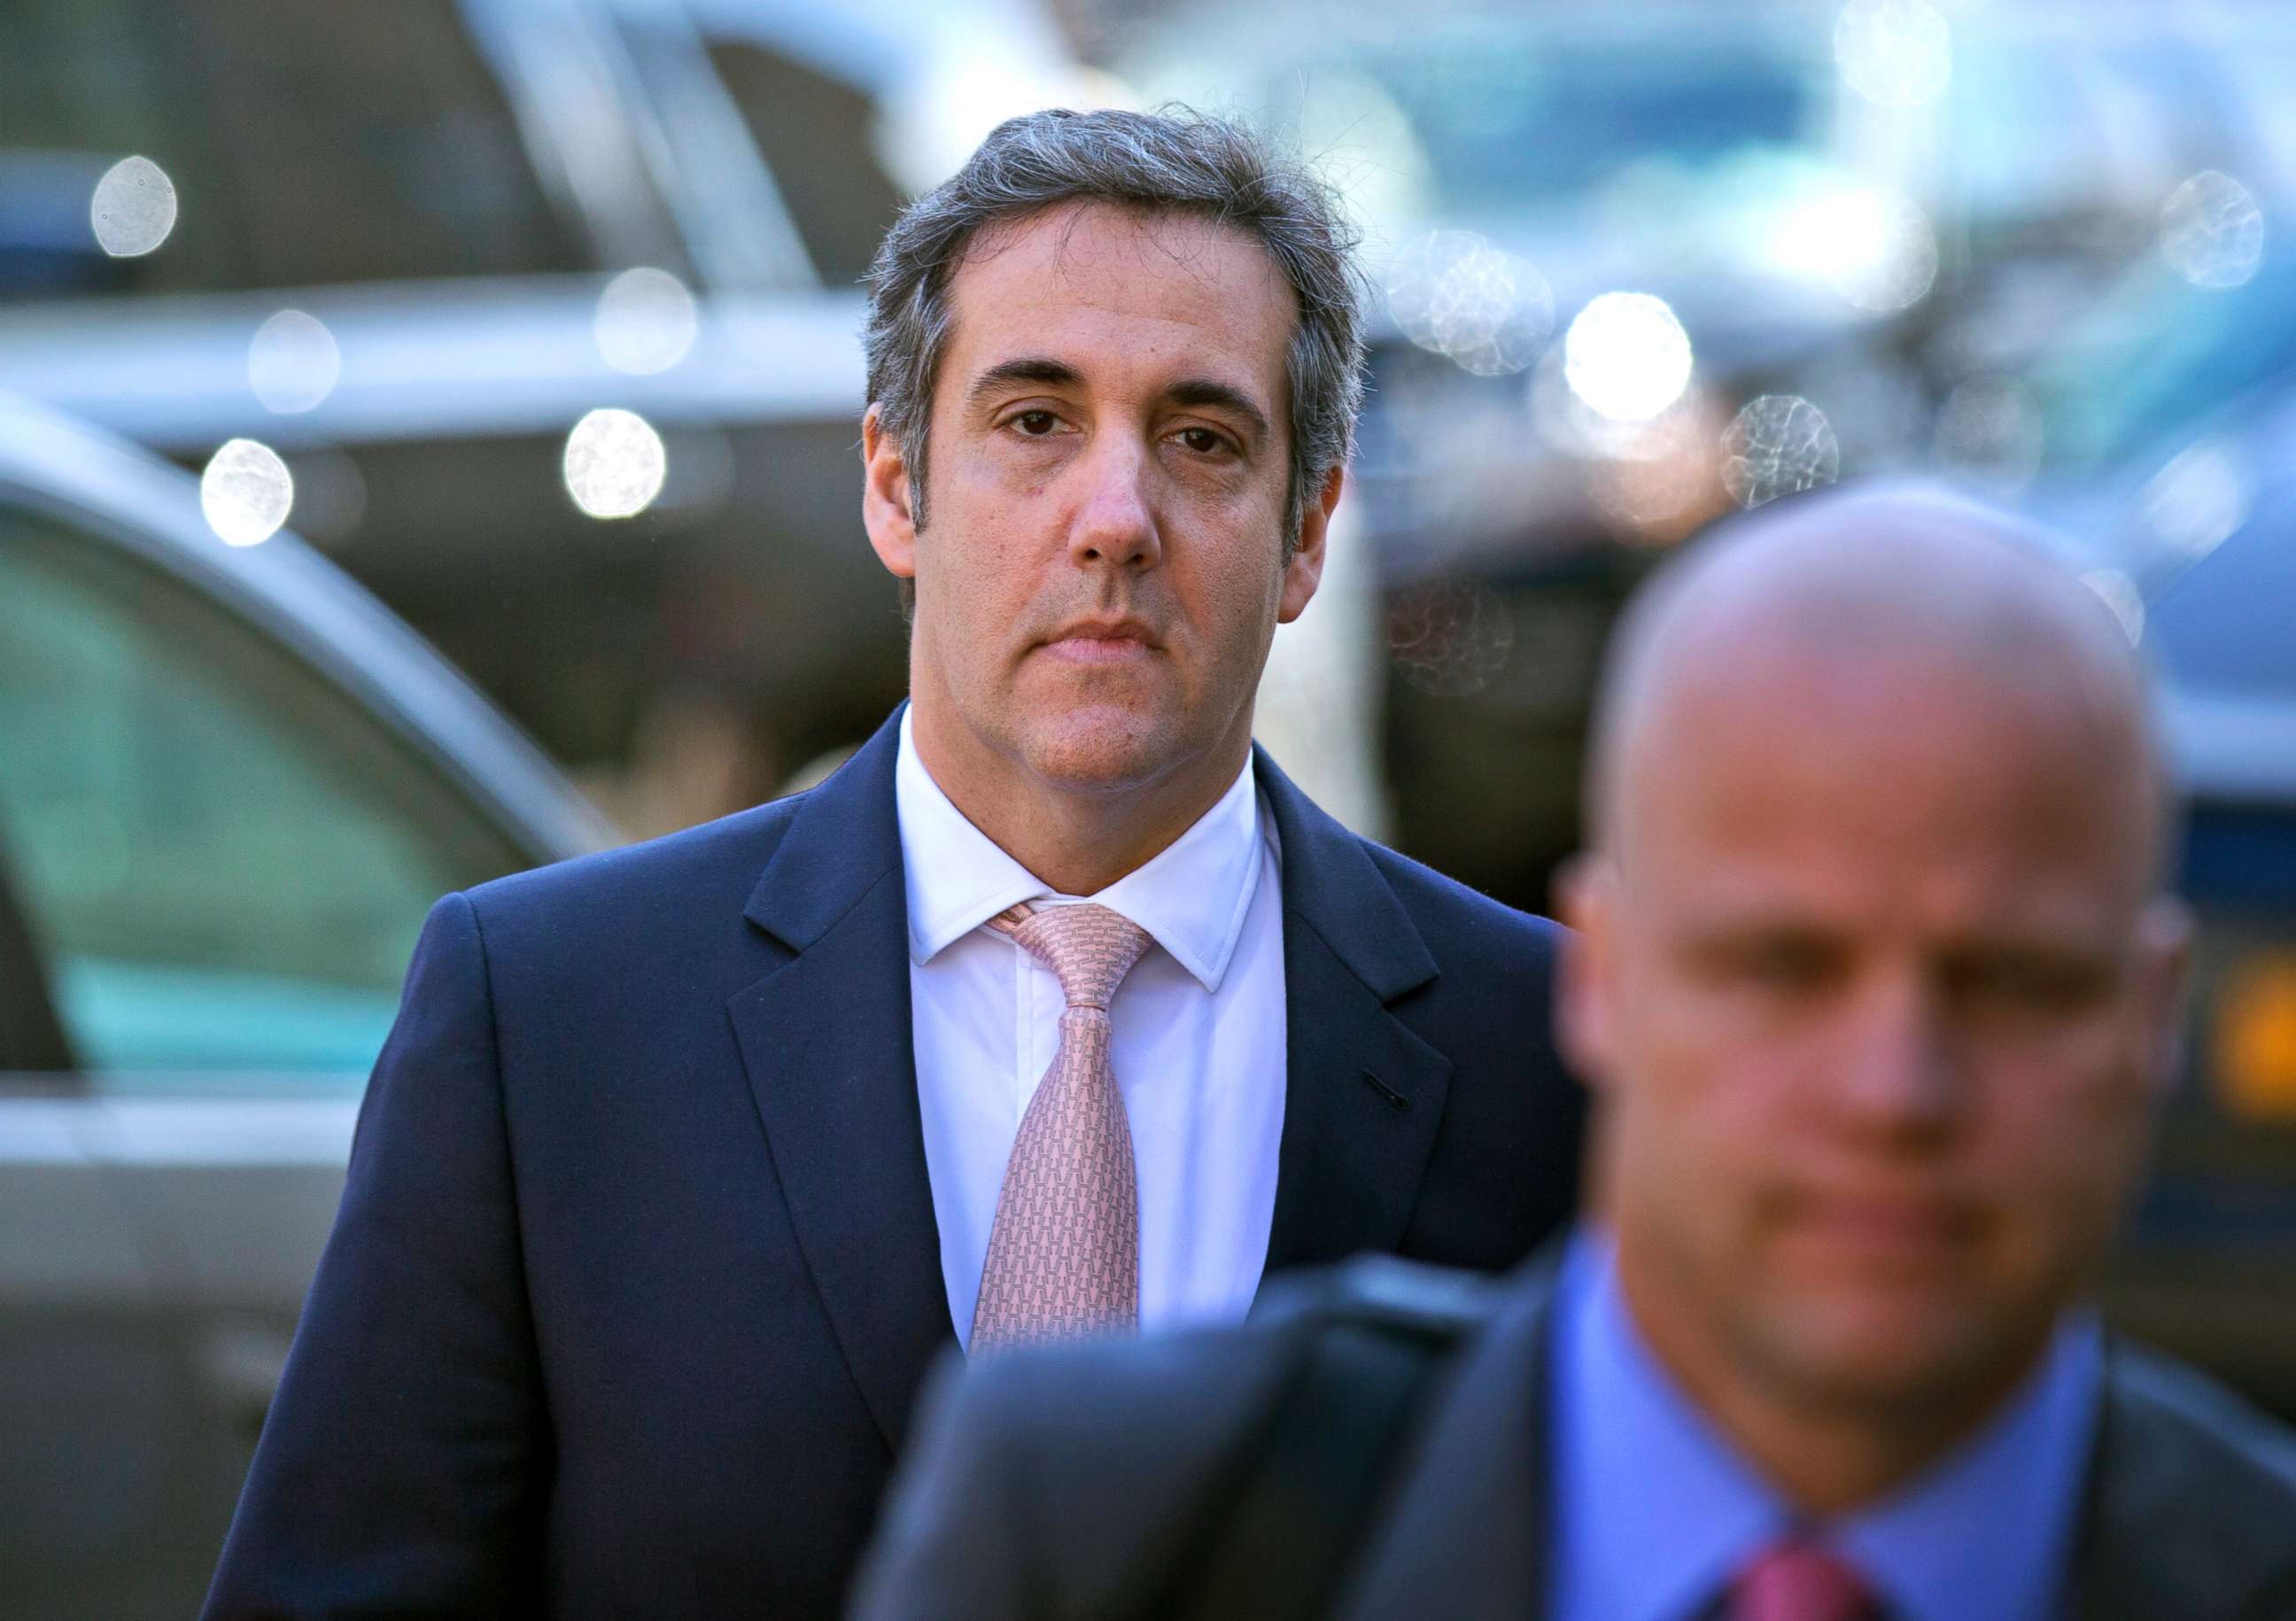 PHOTO: Michael Cohen arrives at federal court in New York, April 26, 2018.